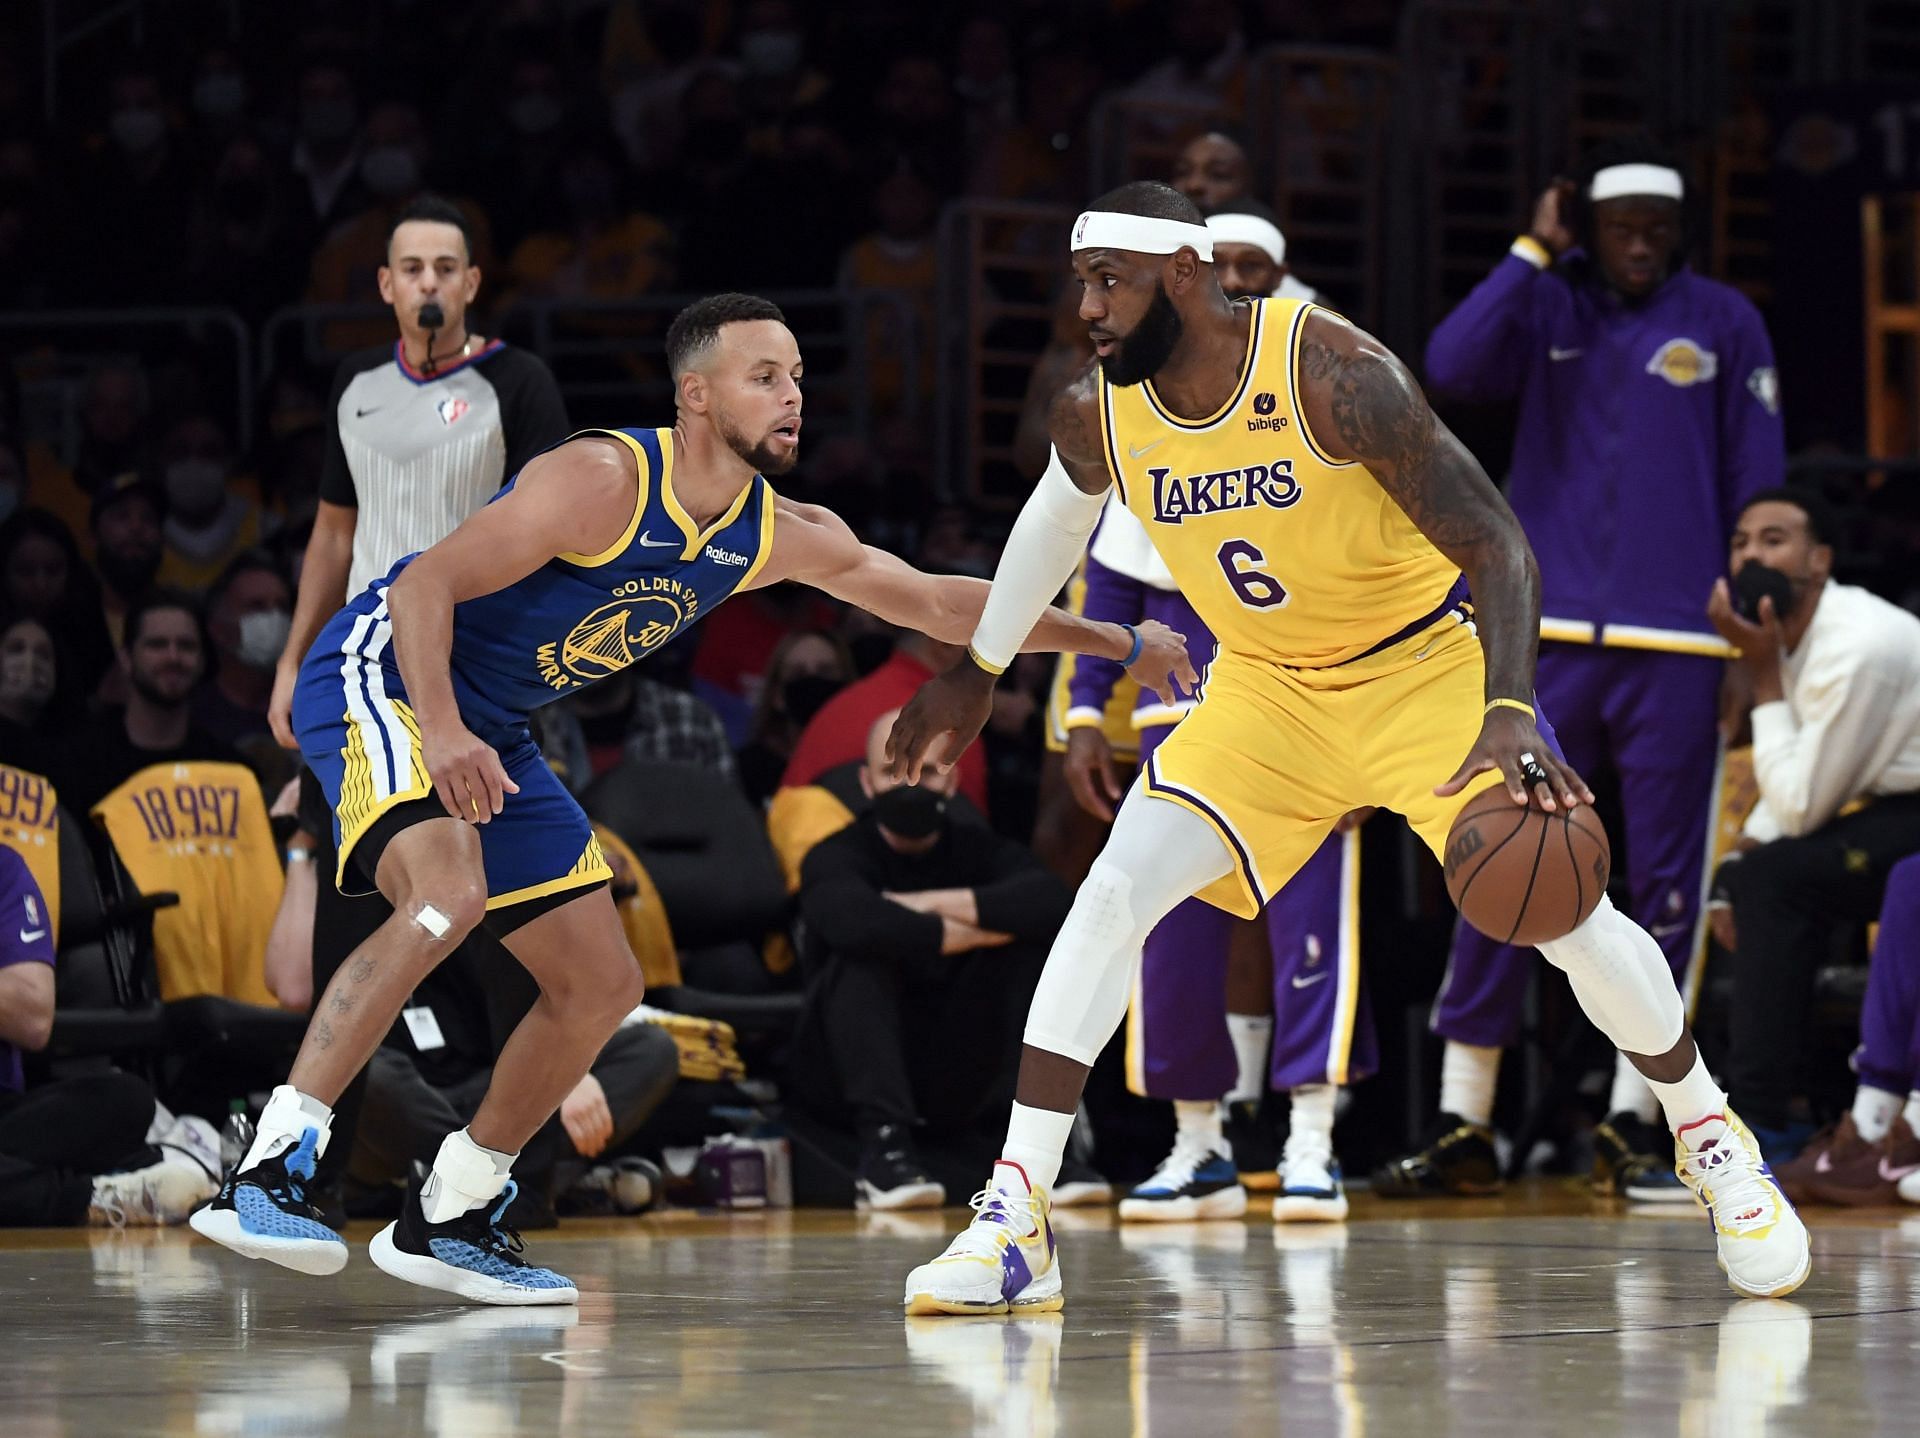 the way it was like Magic and Bird is going to be LeBron and Steph" - ...